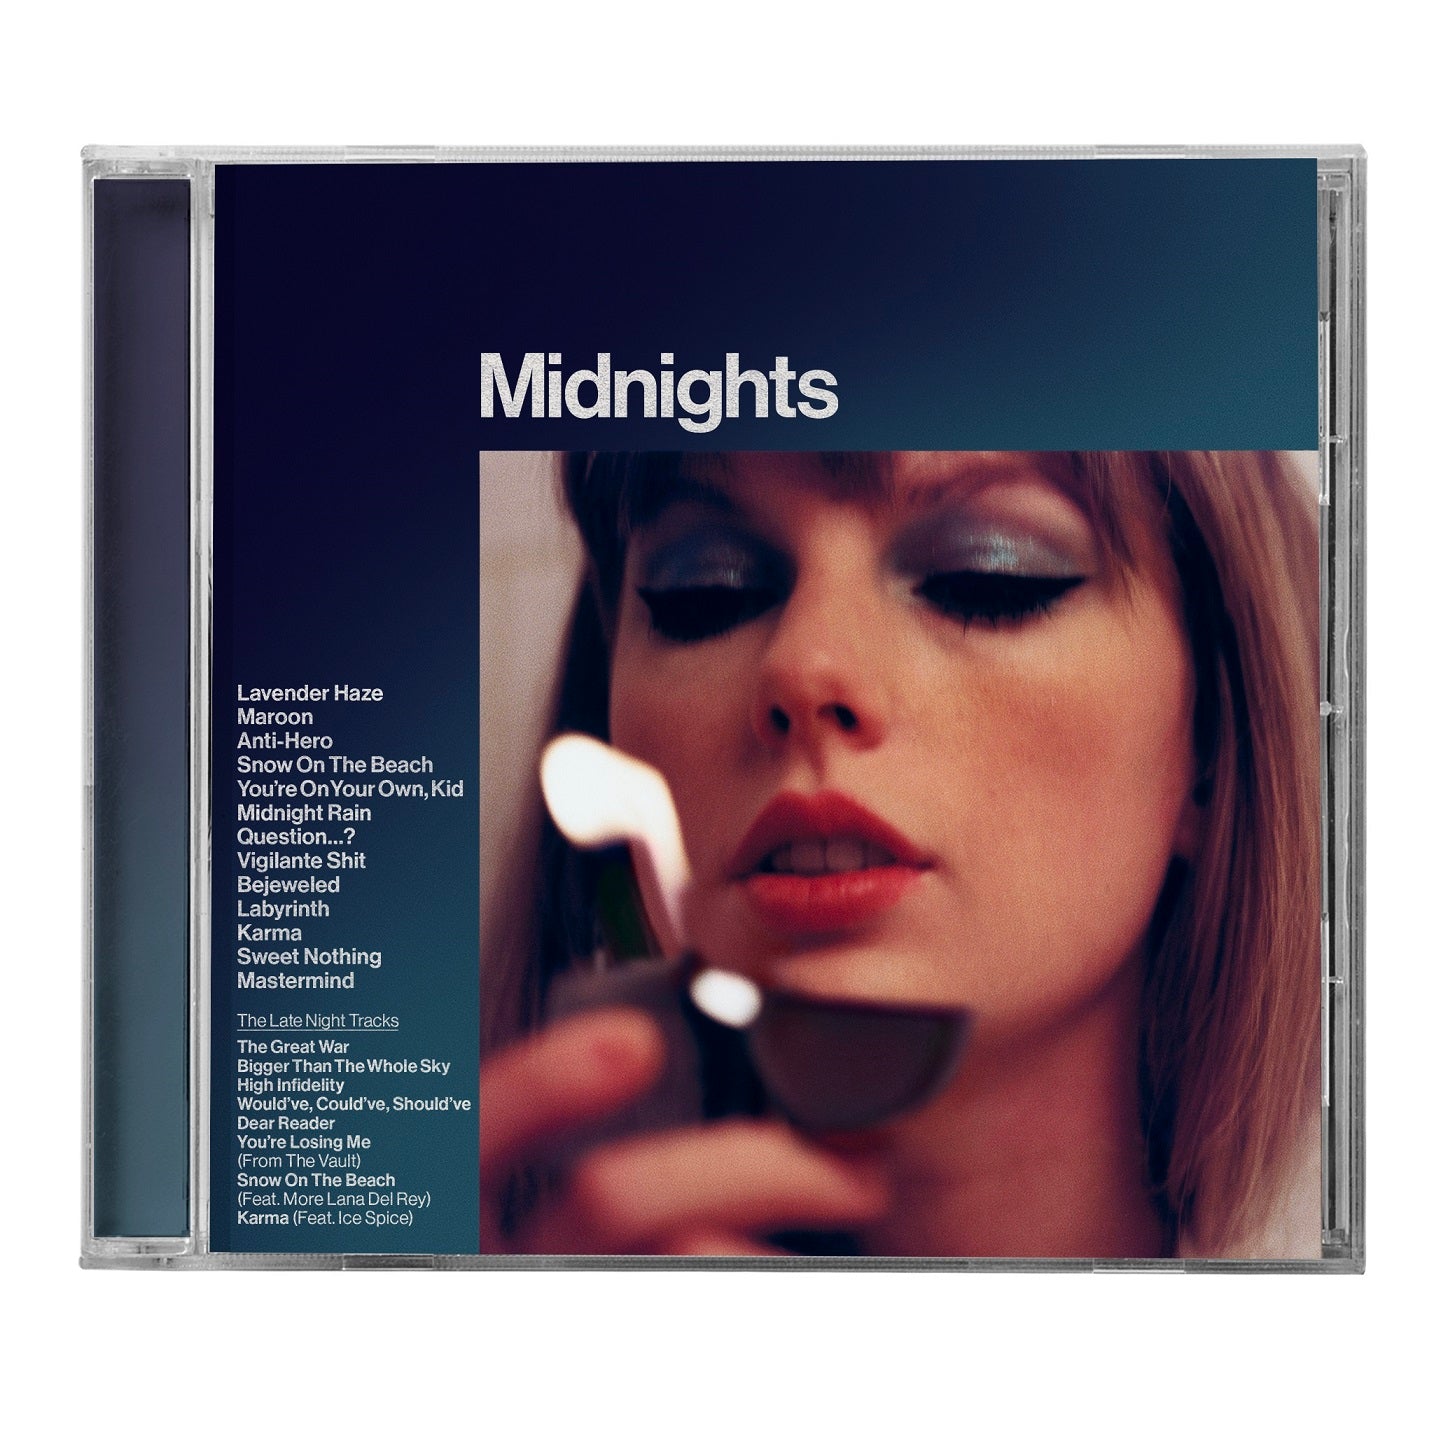 Taylor Swift- Midnights (The Late Night Edition) (CRACKED JEWEL CASE)